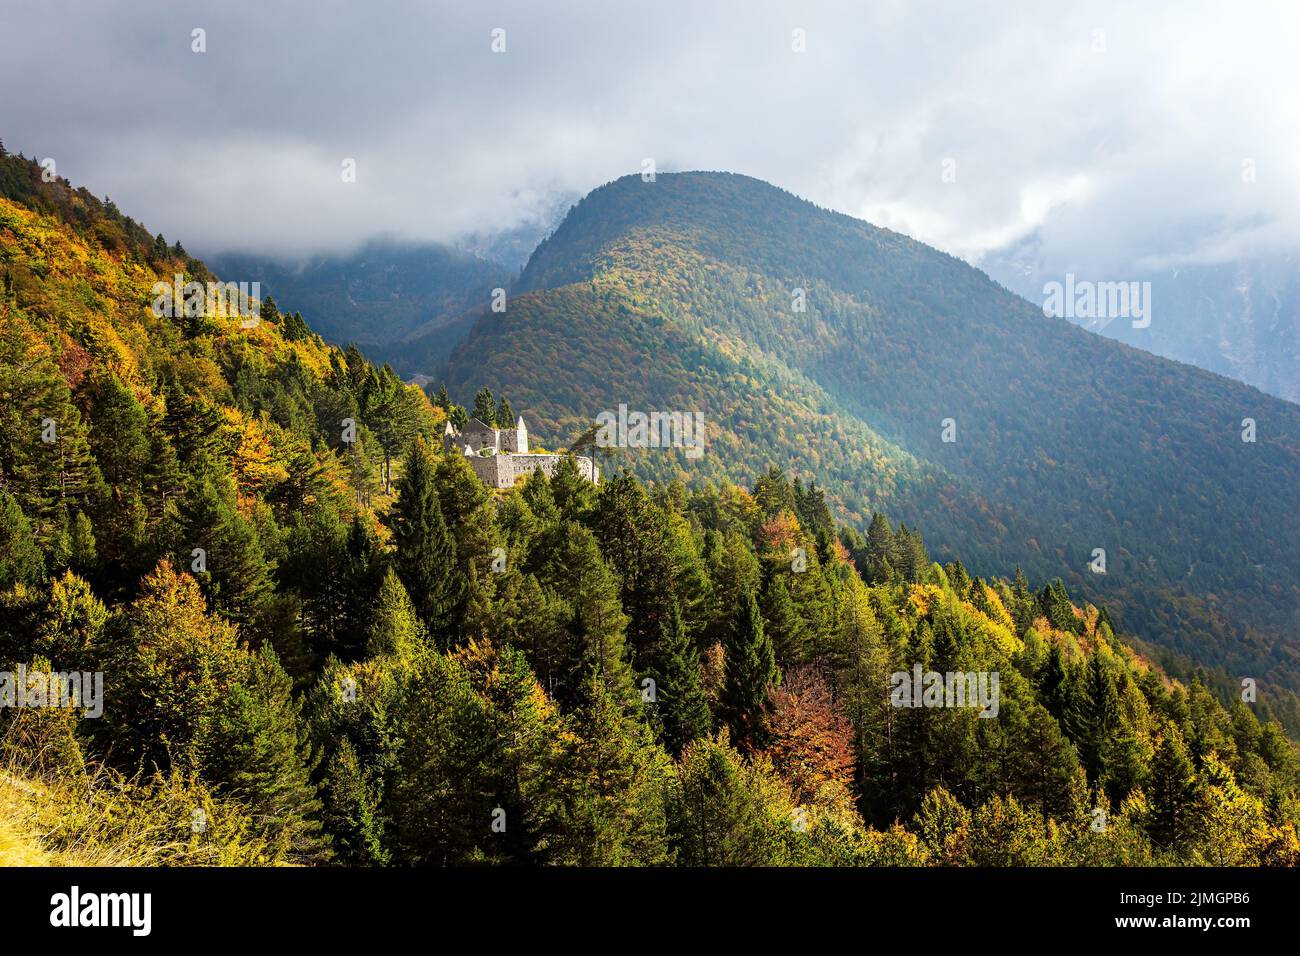 Ruins of castle on a mountainside Stock Photo